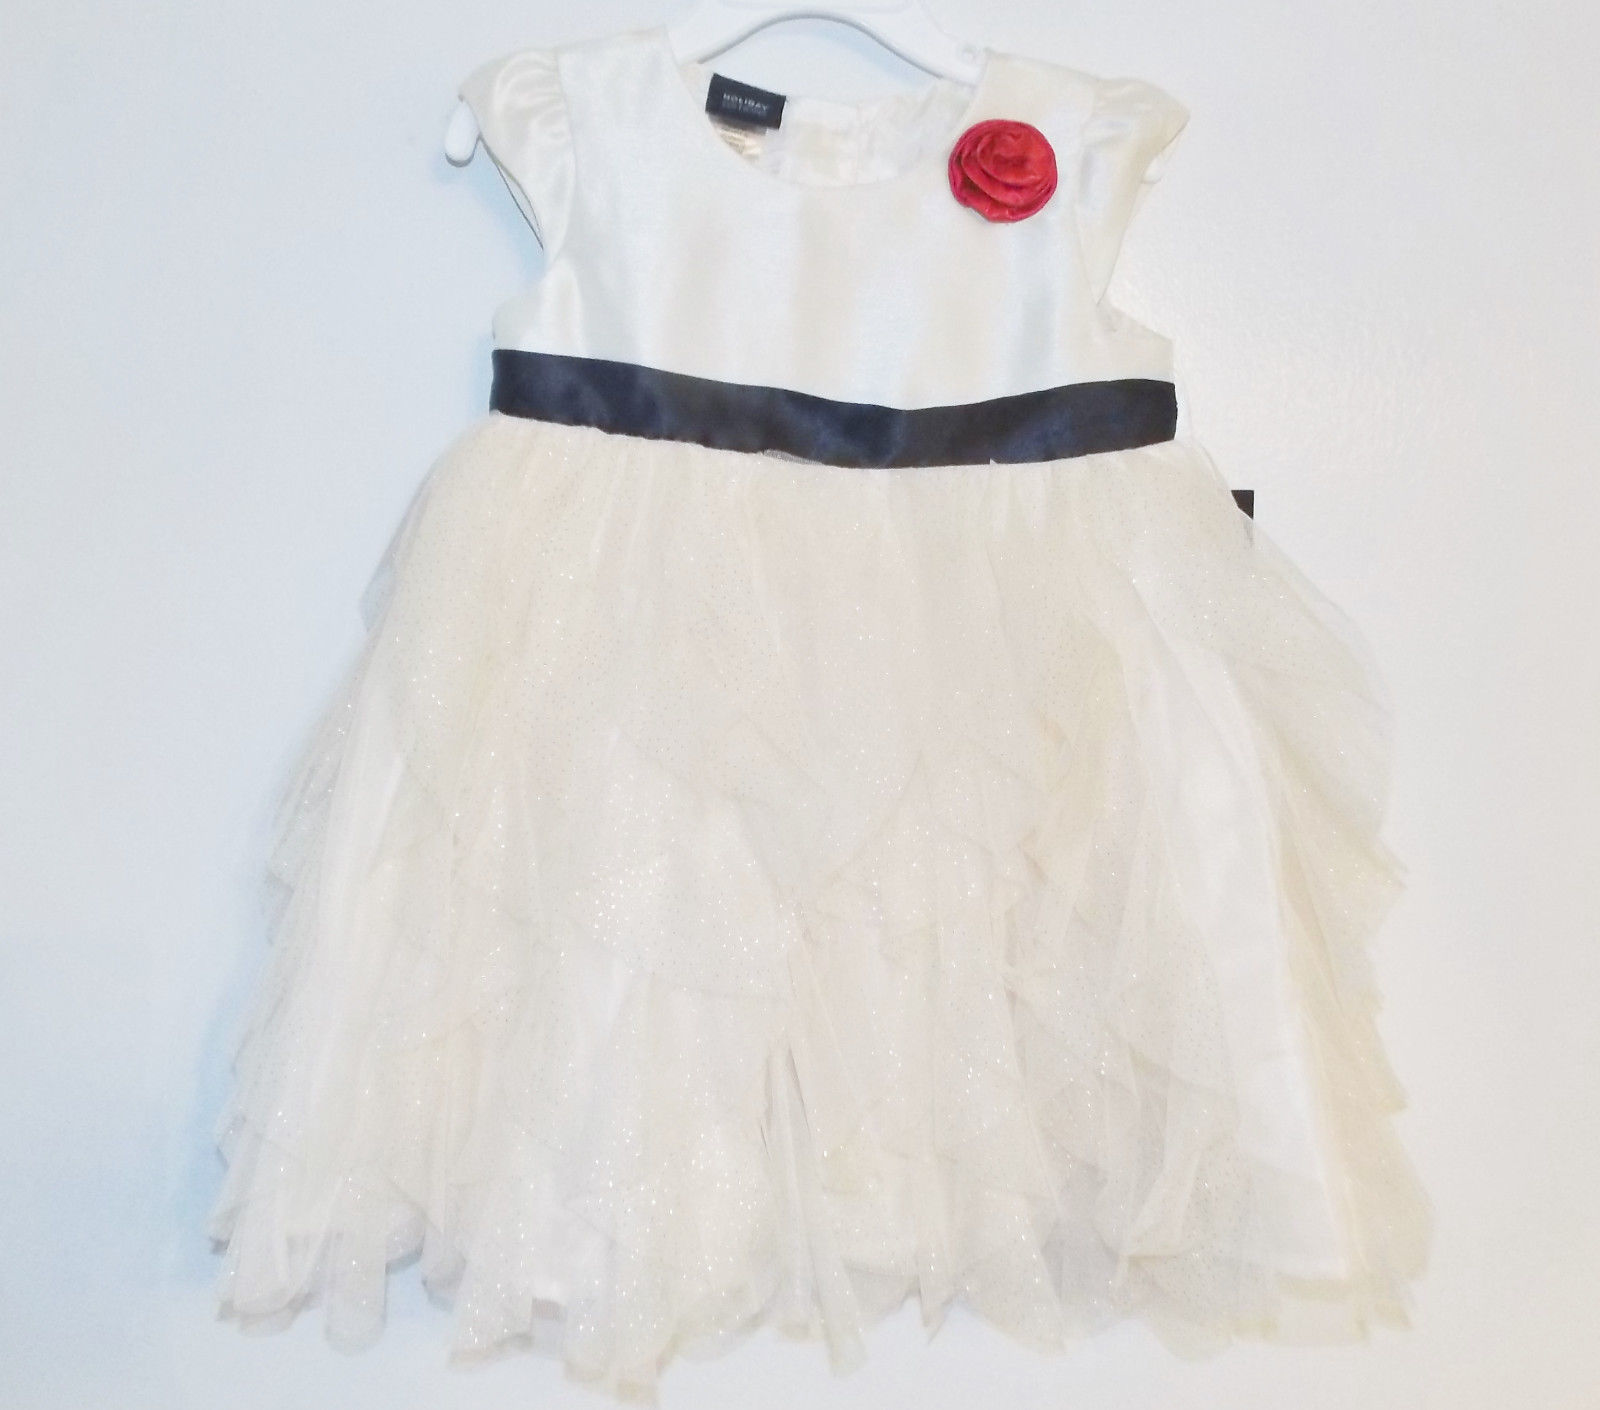 Holiday Editions Toddler Girls Dress Size-2T or 3T NWT - $19.99